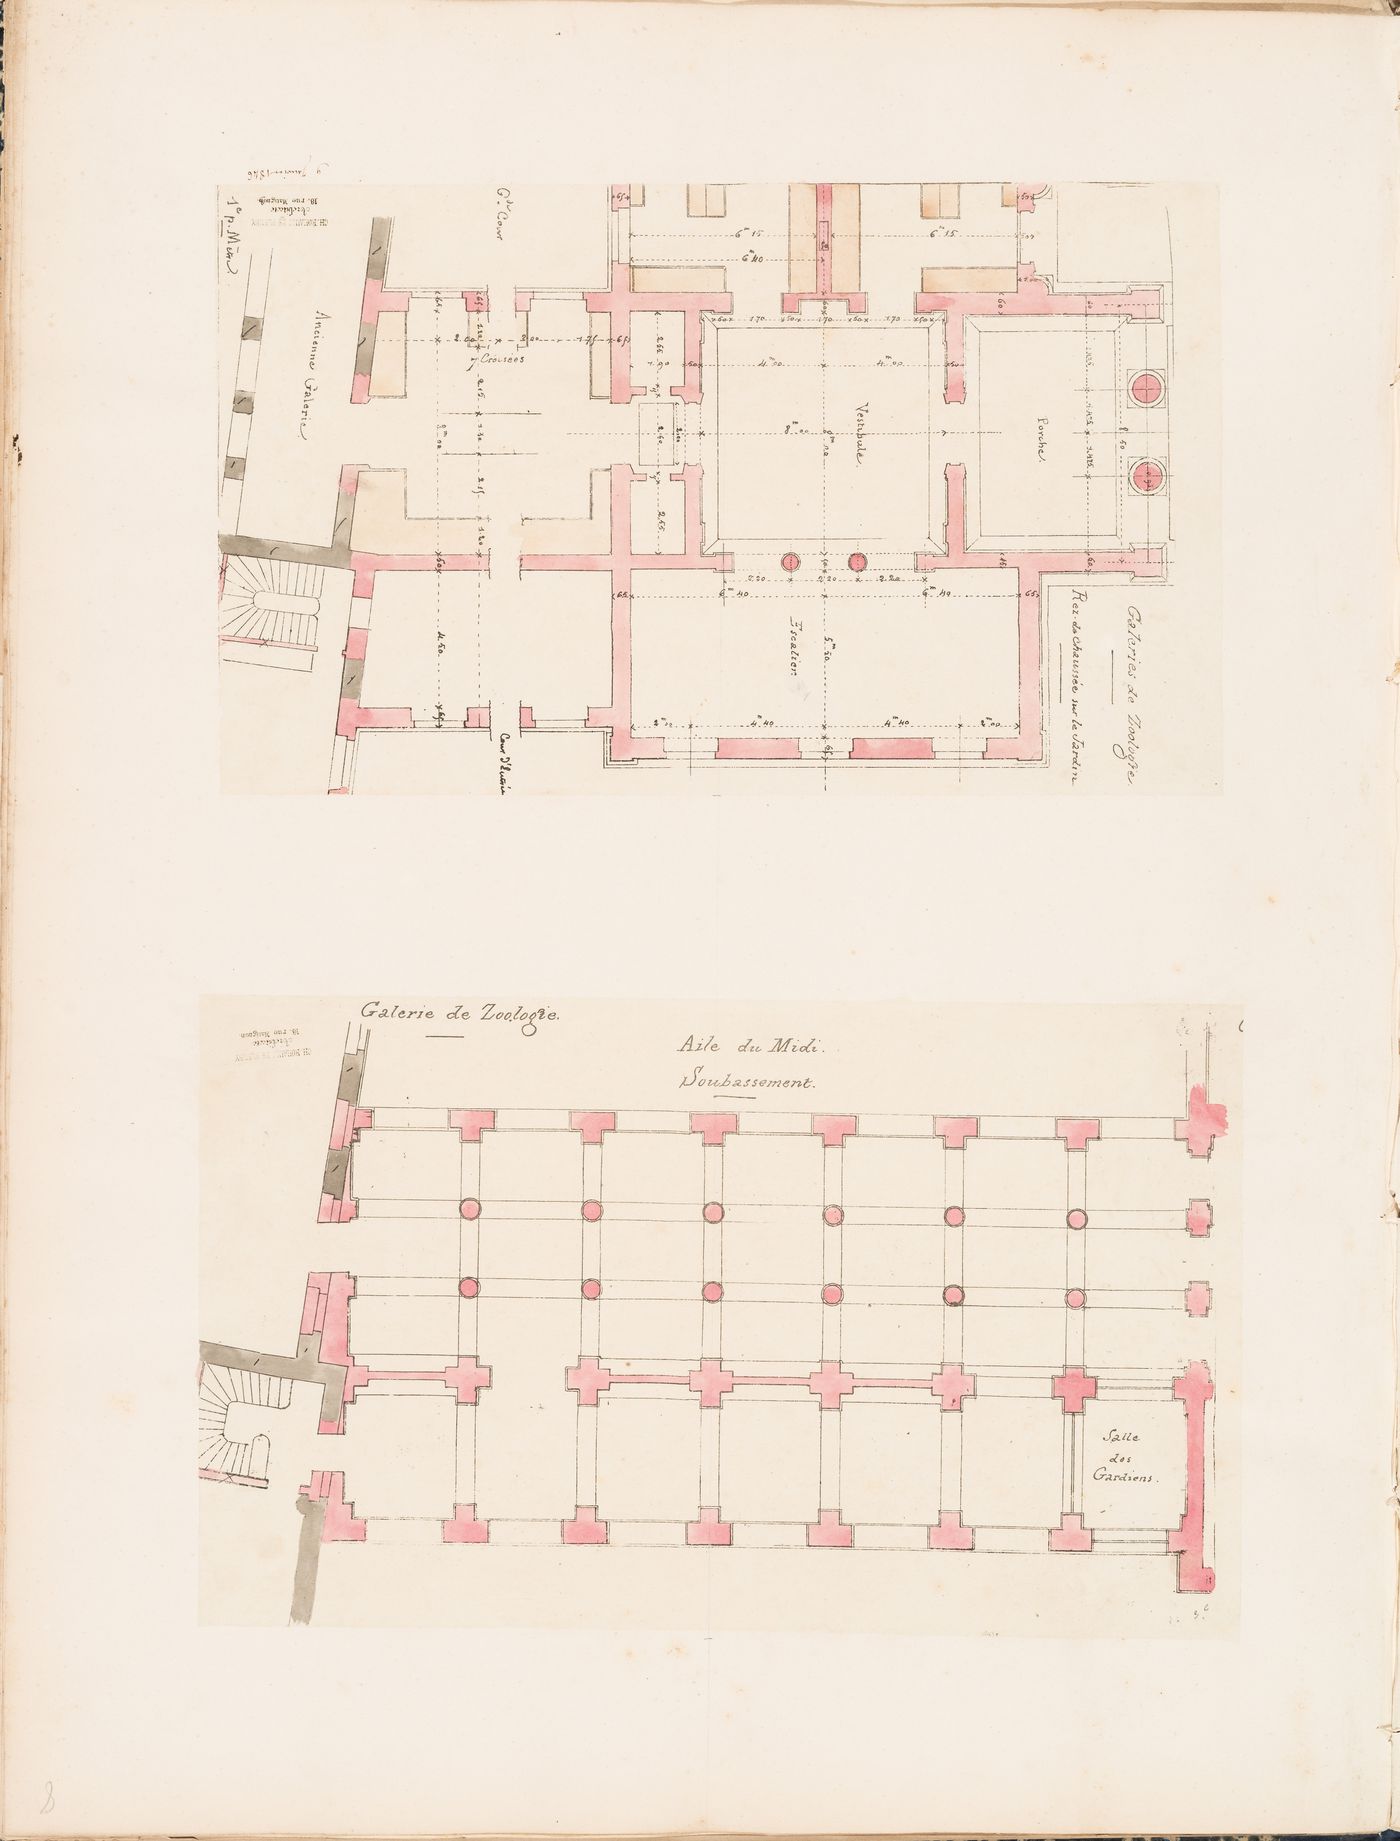 Project for a Galerie de zoologie, 1846: Plan for the "soubassement" of the south wing and partial ground floor plan showing the entrance